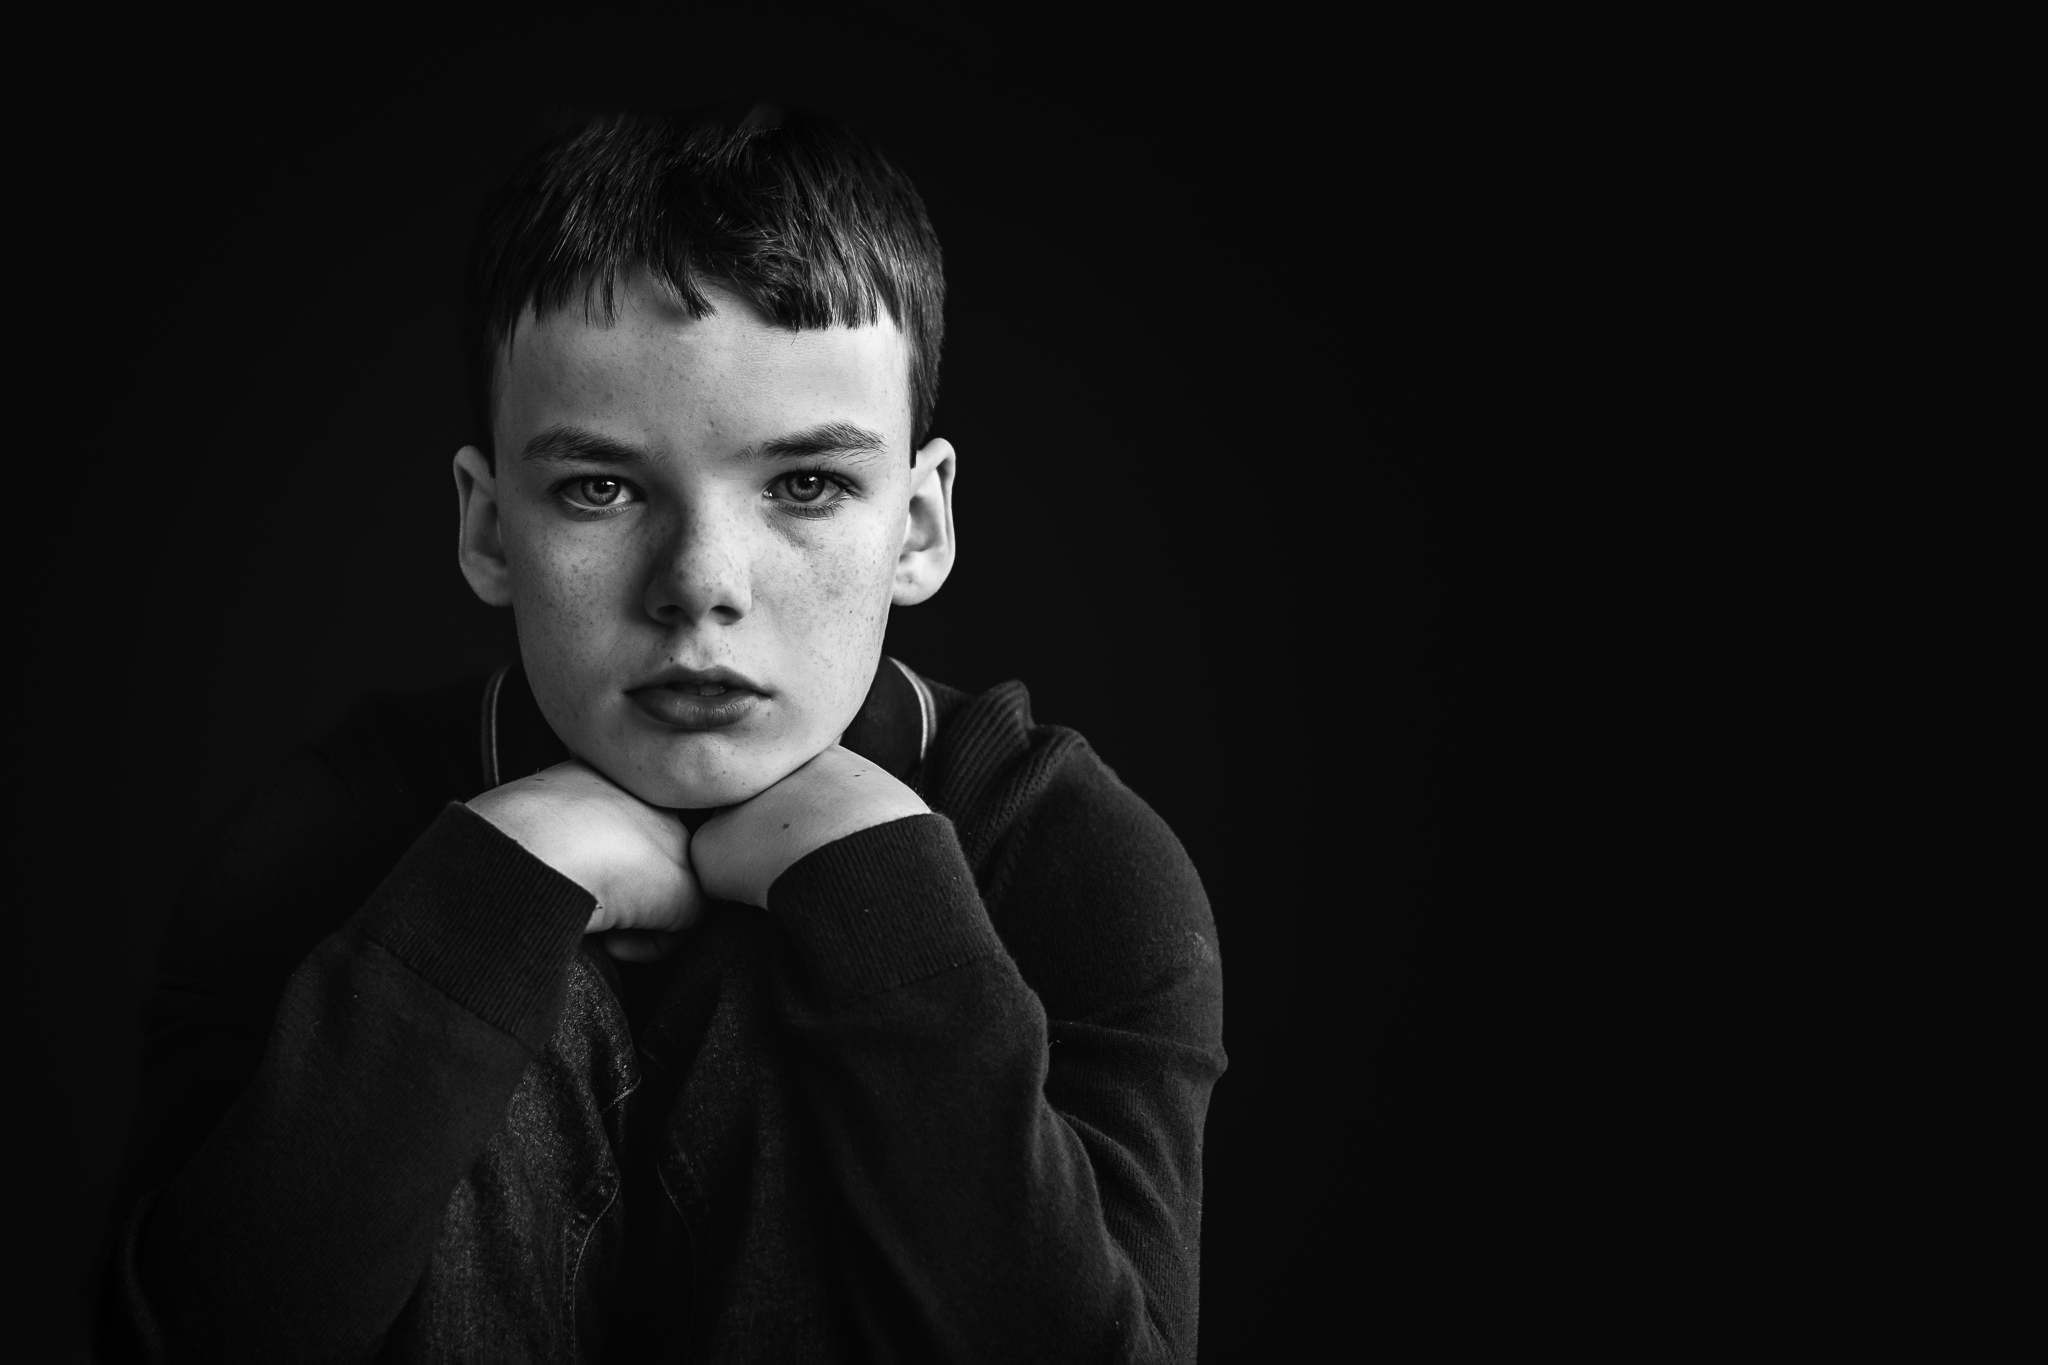 Black and white portrait of young boy